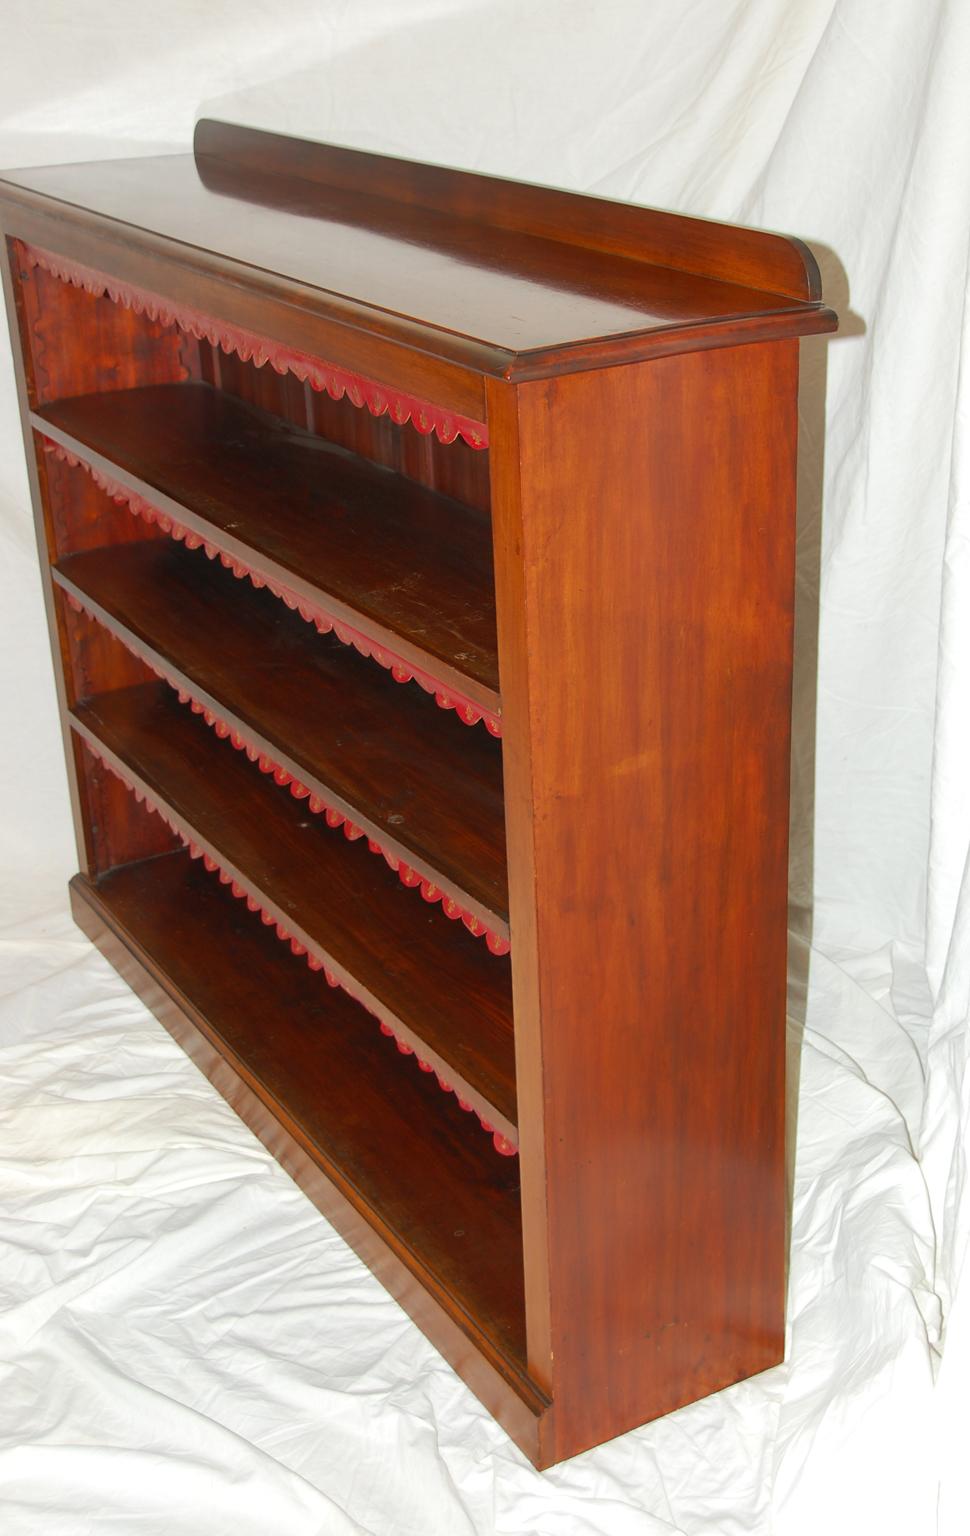 19th Century English Victorian Mahogany Bookcase with Adjustable Shelves and Leather Edgings